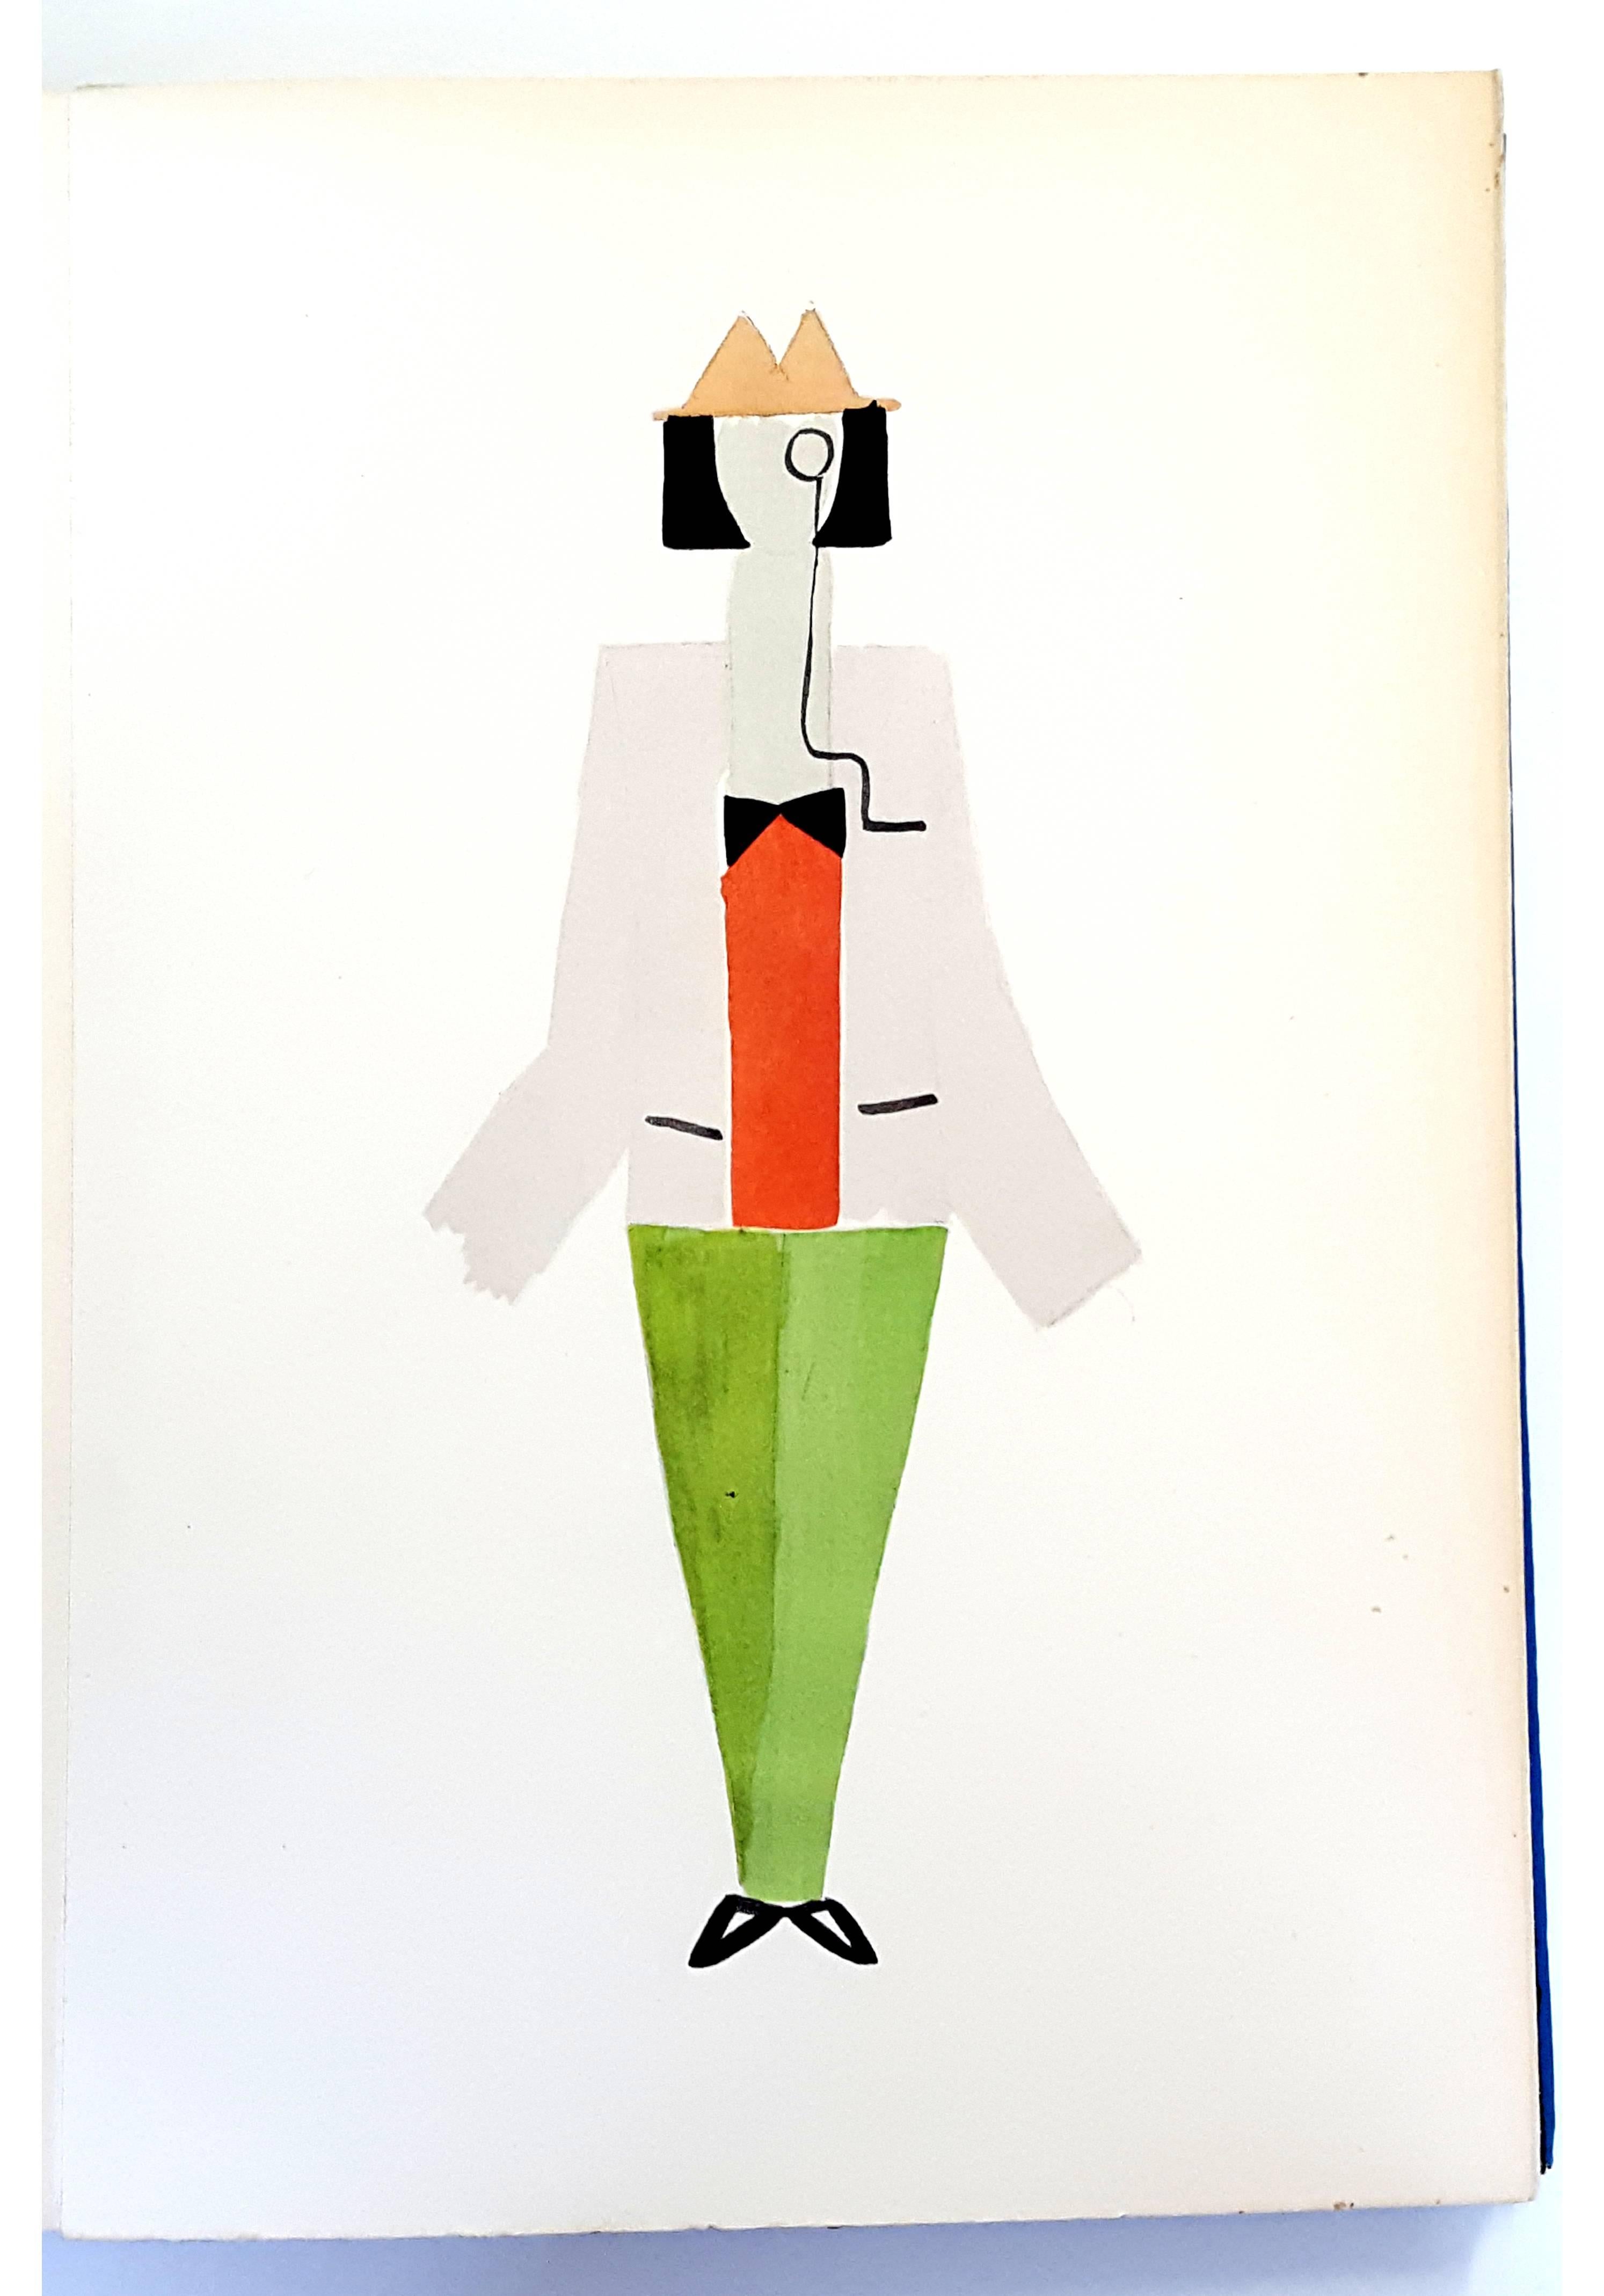 Full-page, colour pochoir after costume designs by Sonia Delaunay
Edition 331/500 copies on Velin Aussedat 
Dimensions: 28.5 x 19.5 cm.
From 27 Living Paintings. [Milano, Edizioni del Naviglio, 1969]. Jacques Damase. Robes Poèmes, Introduction. Text